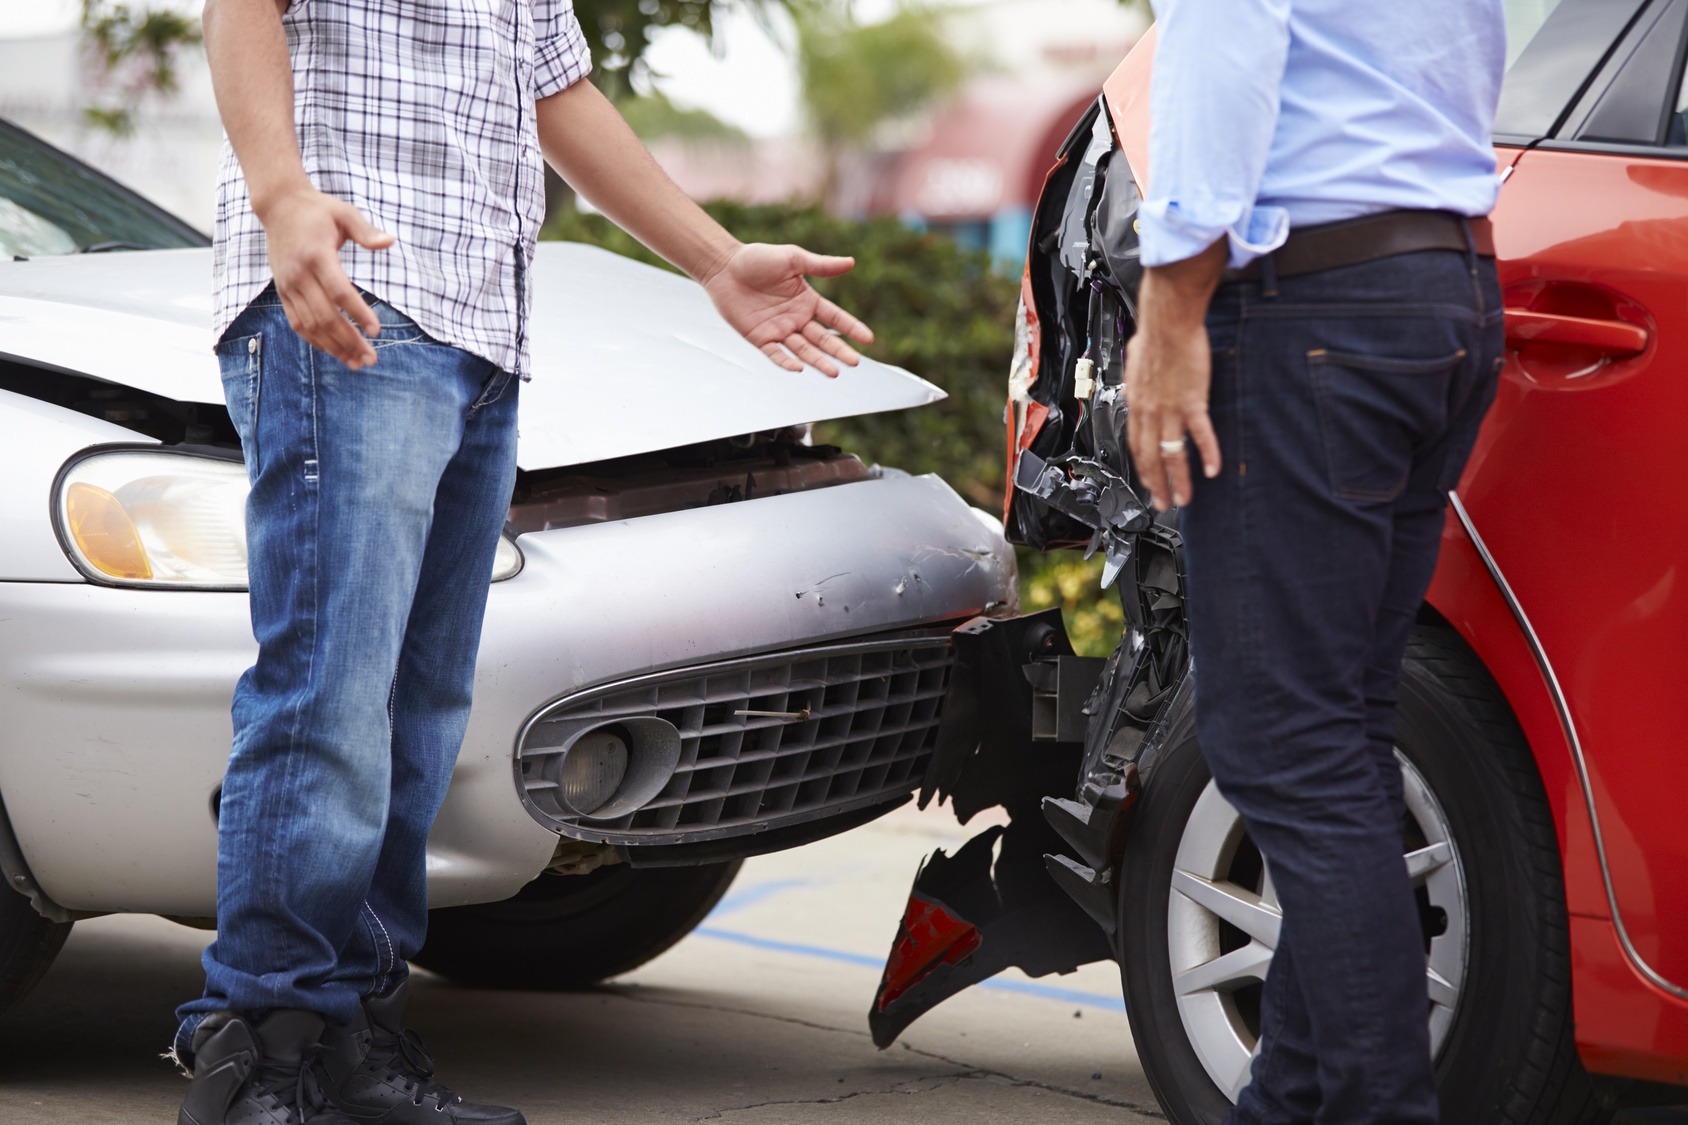 Should I Get A Lawyer For A Car Accident That Wasn’t My Fault?